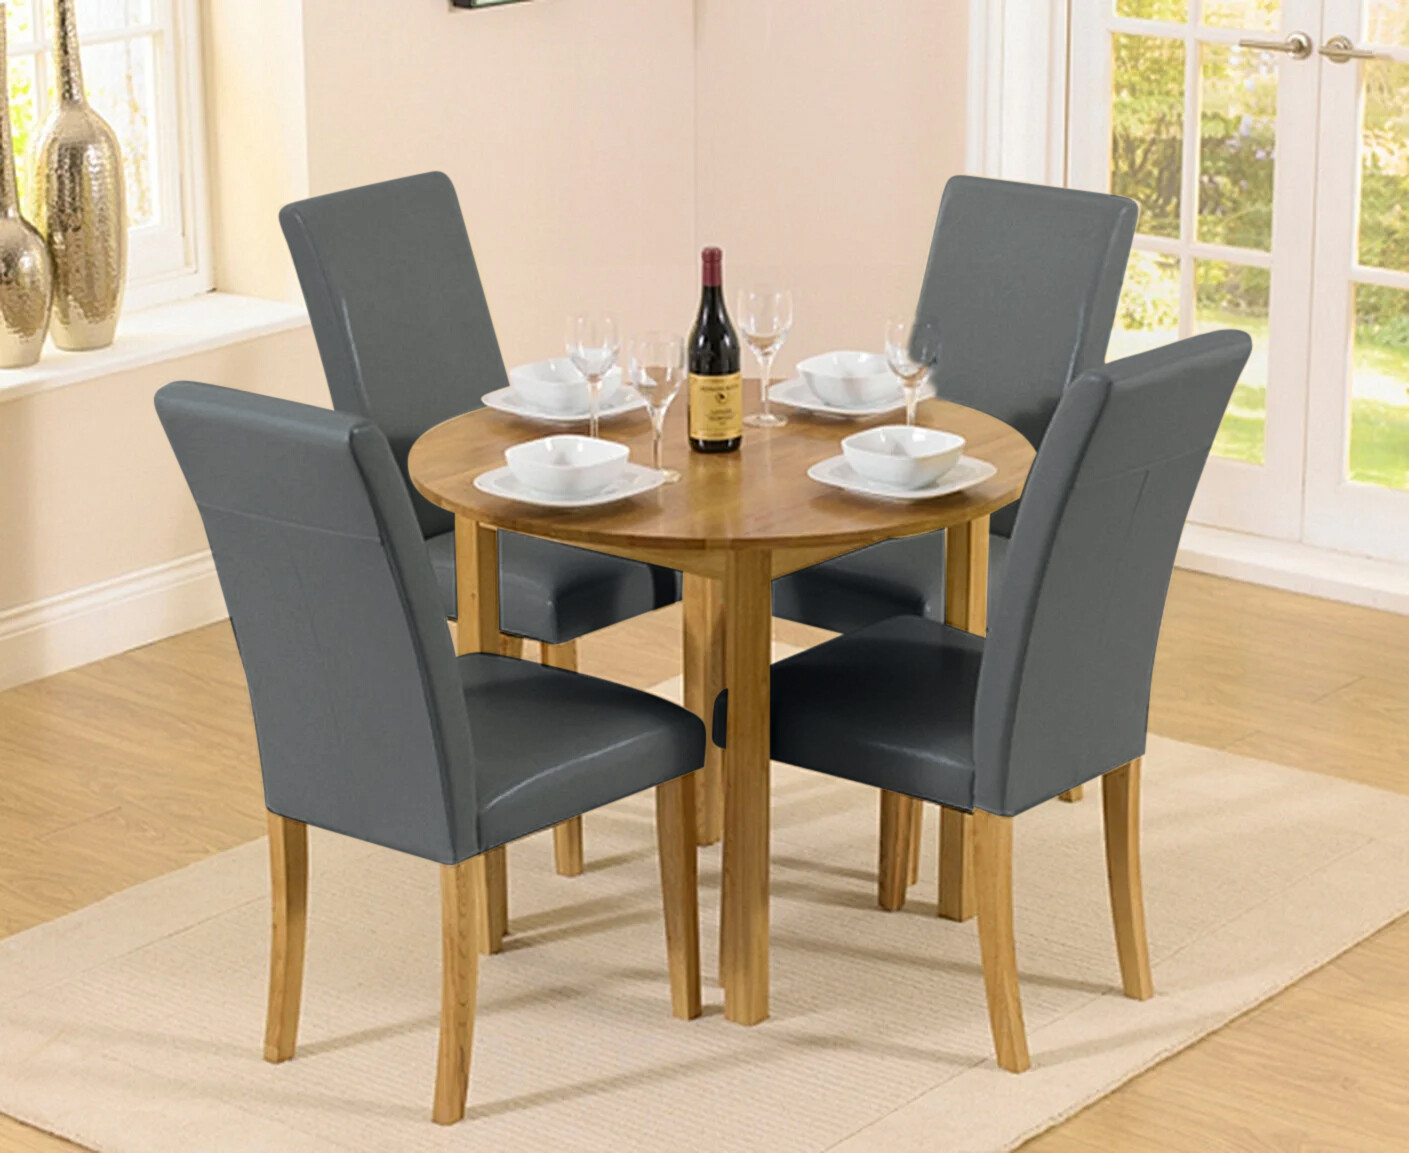 Extending York 90cm Solid Oak Drop Leaf Dining Table With 4 Grey Olivia Chairs